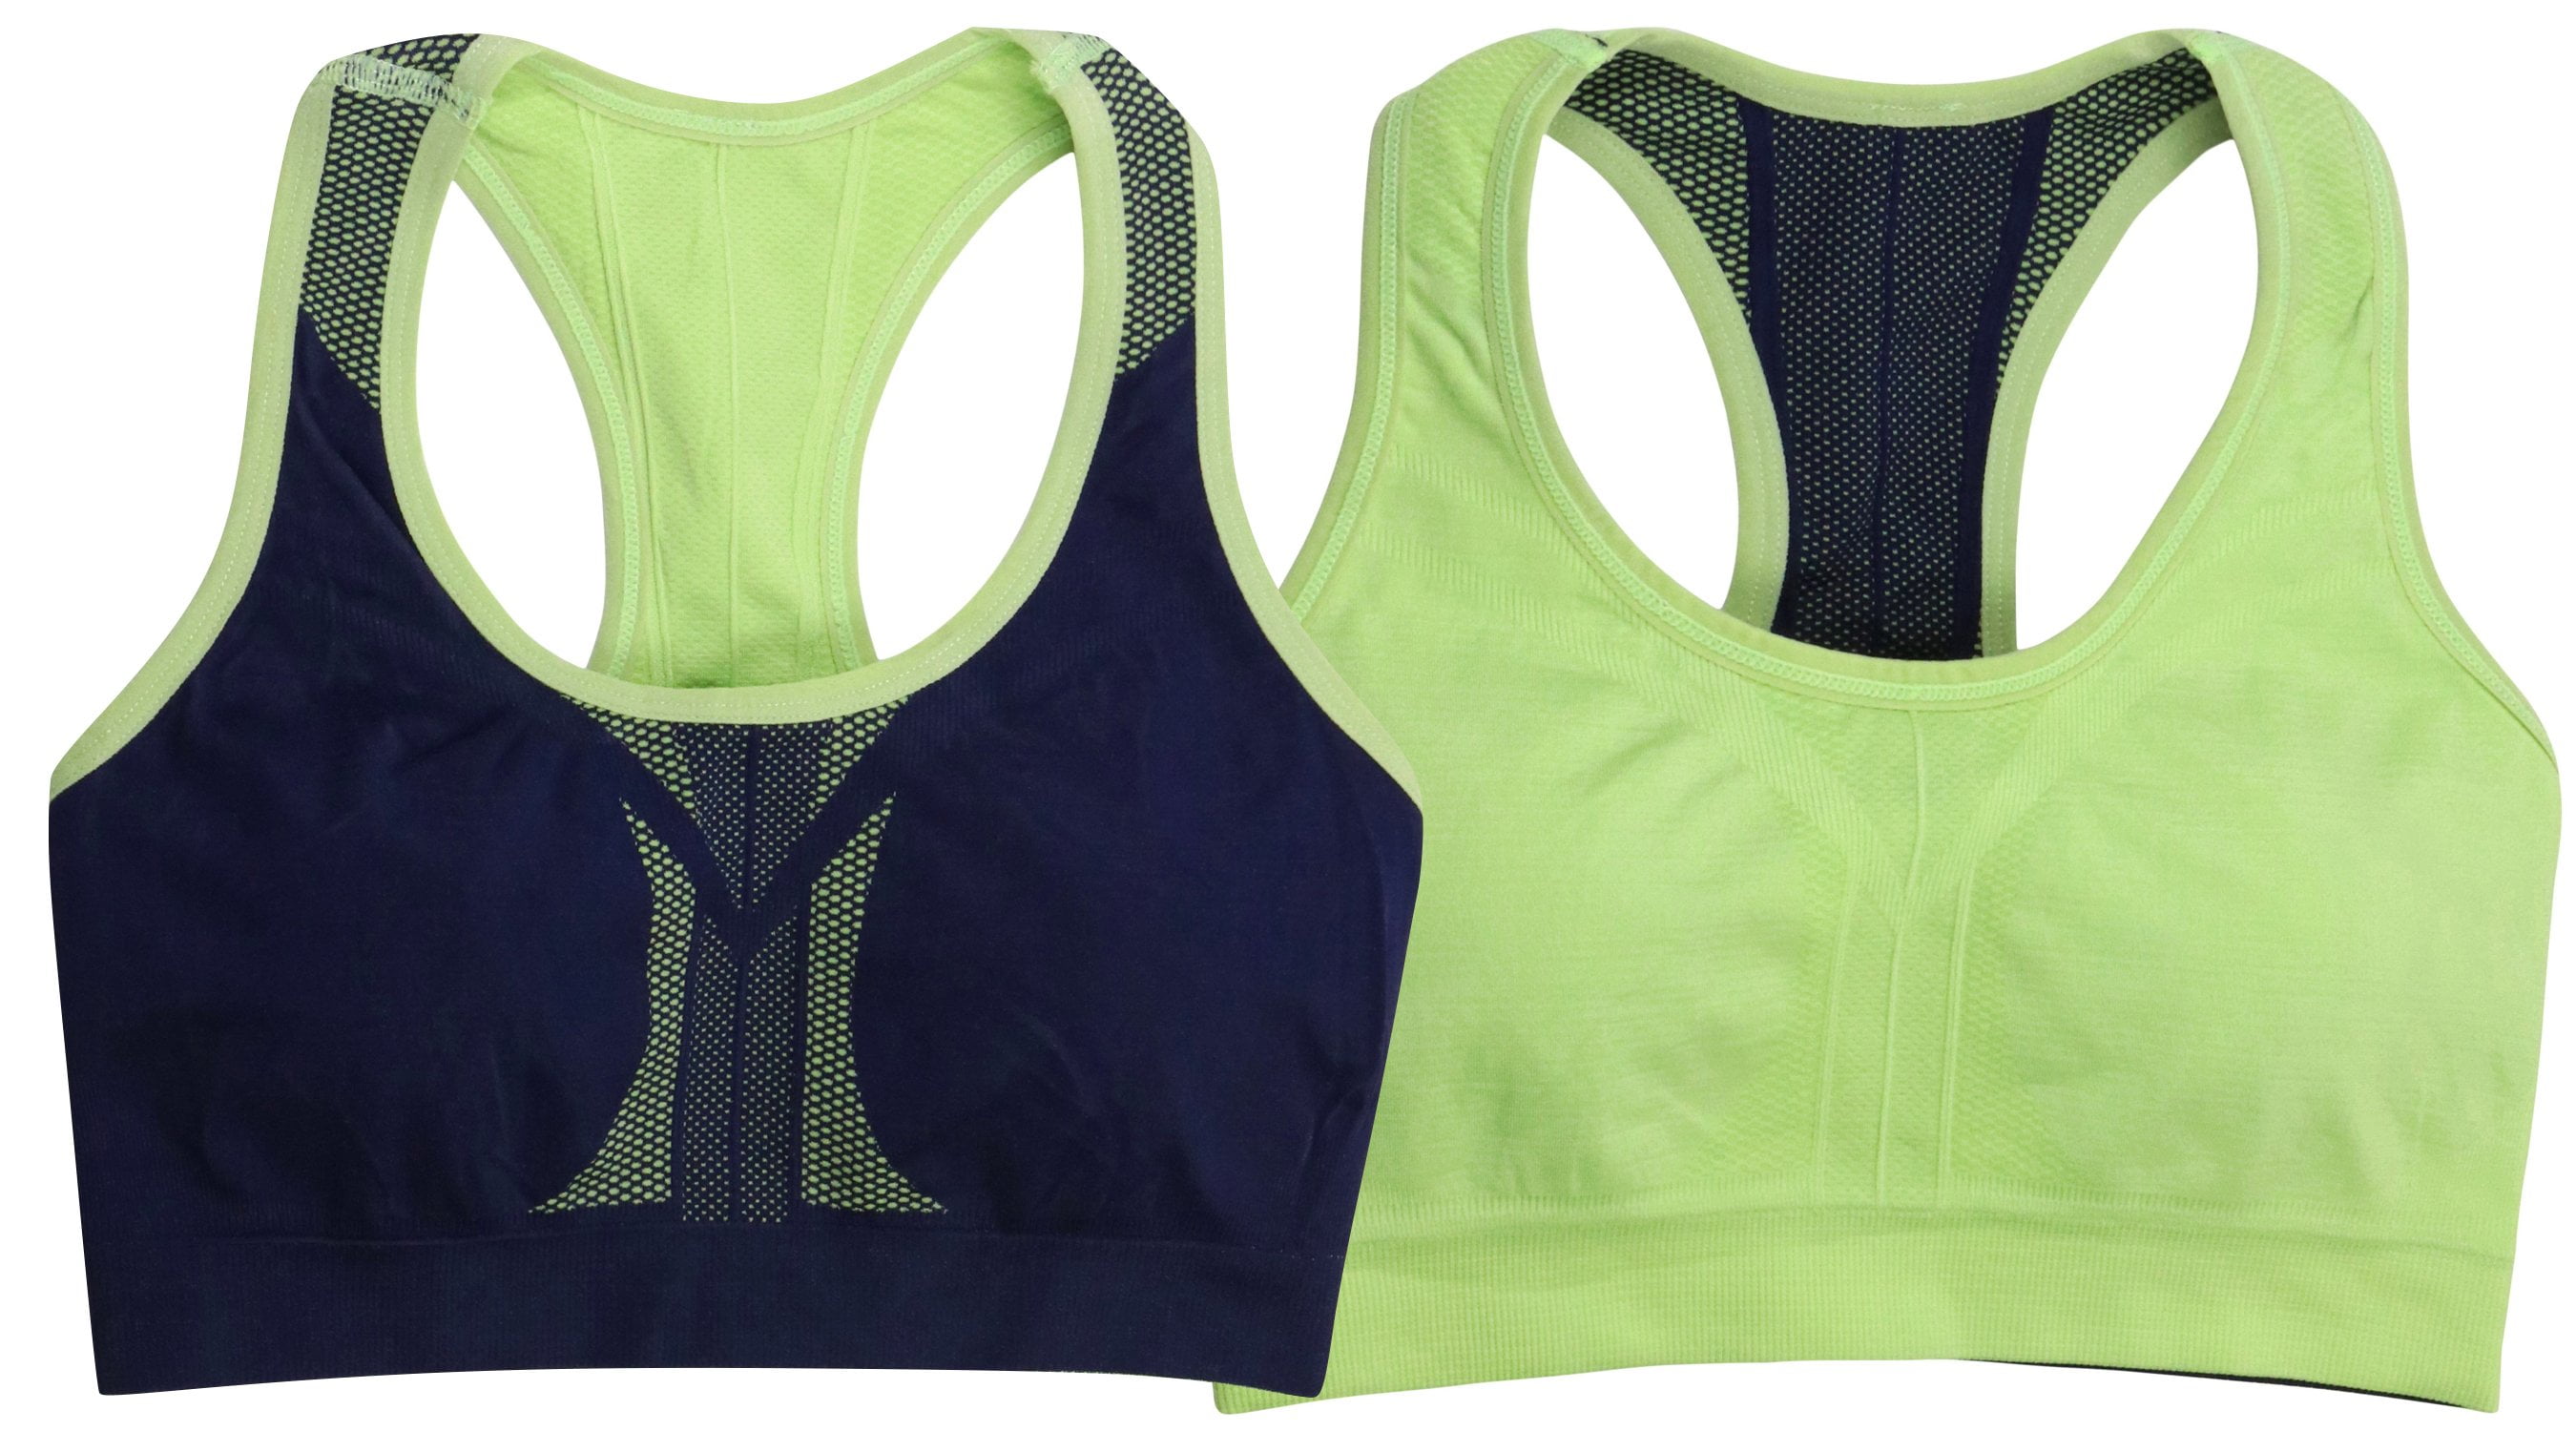 ToBeInStyle Women's Reversible Compression Double Layered Sports Bras X- Large, Neon Green/Navy 